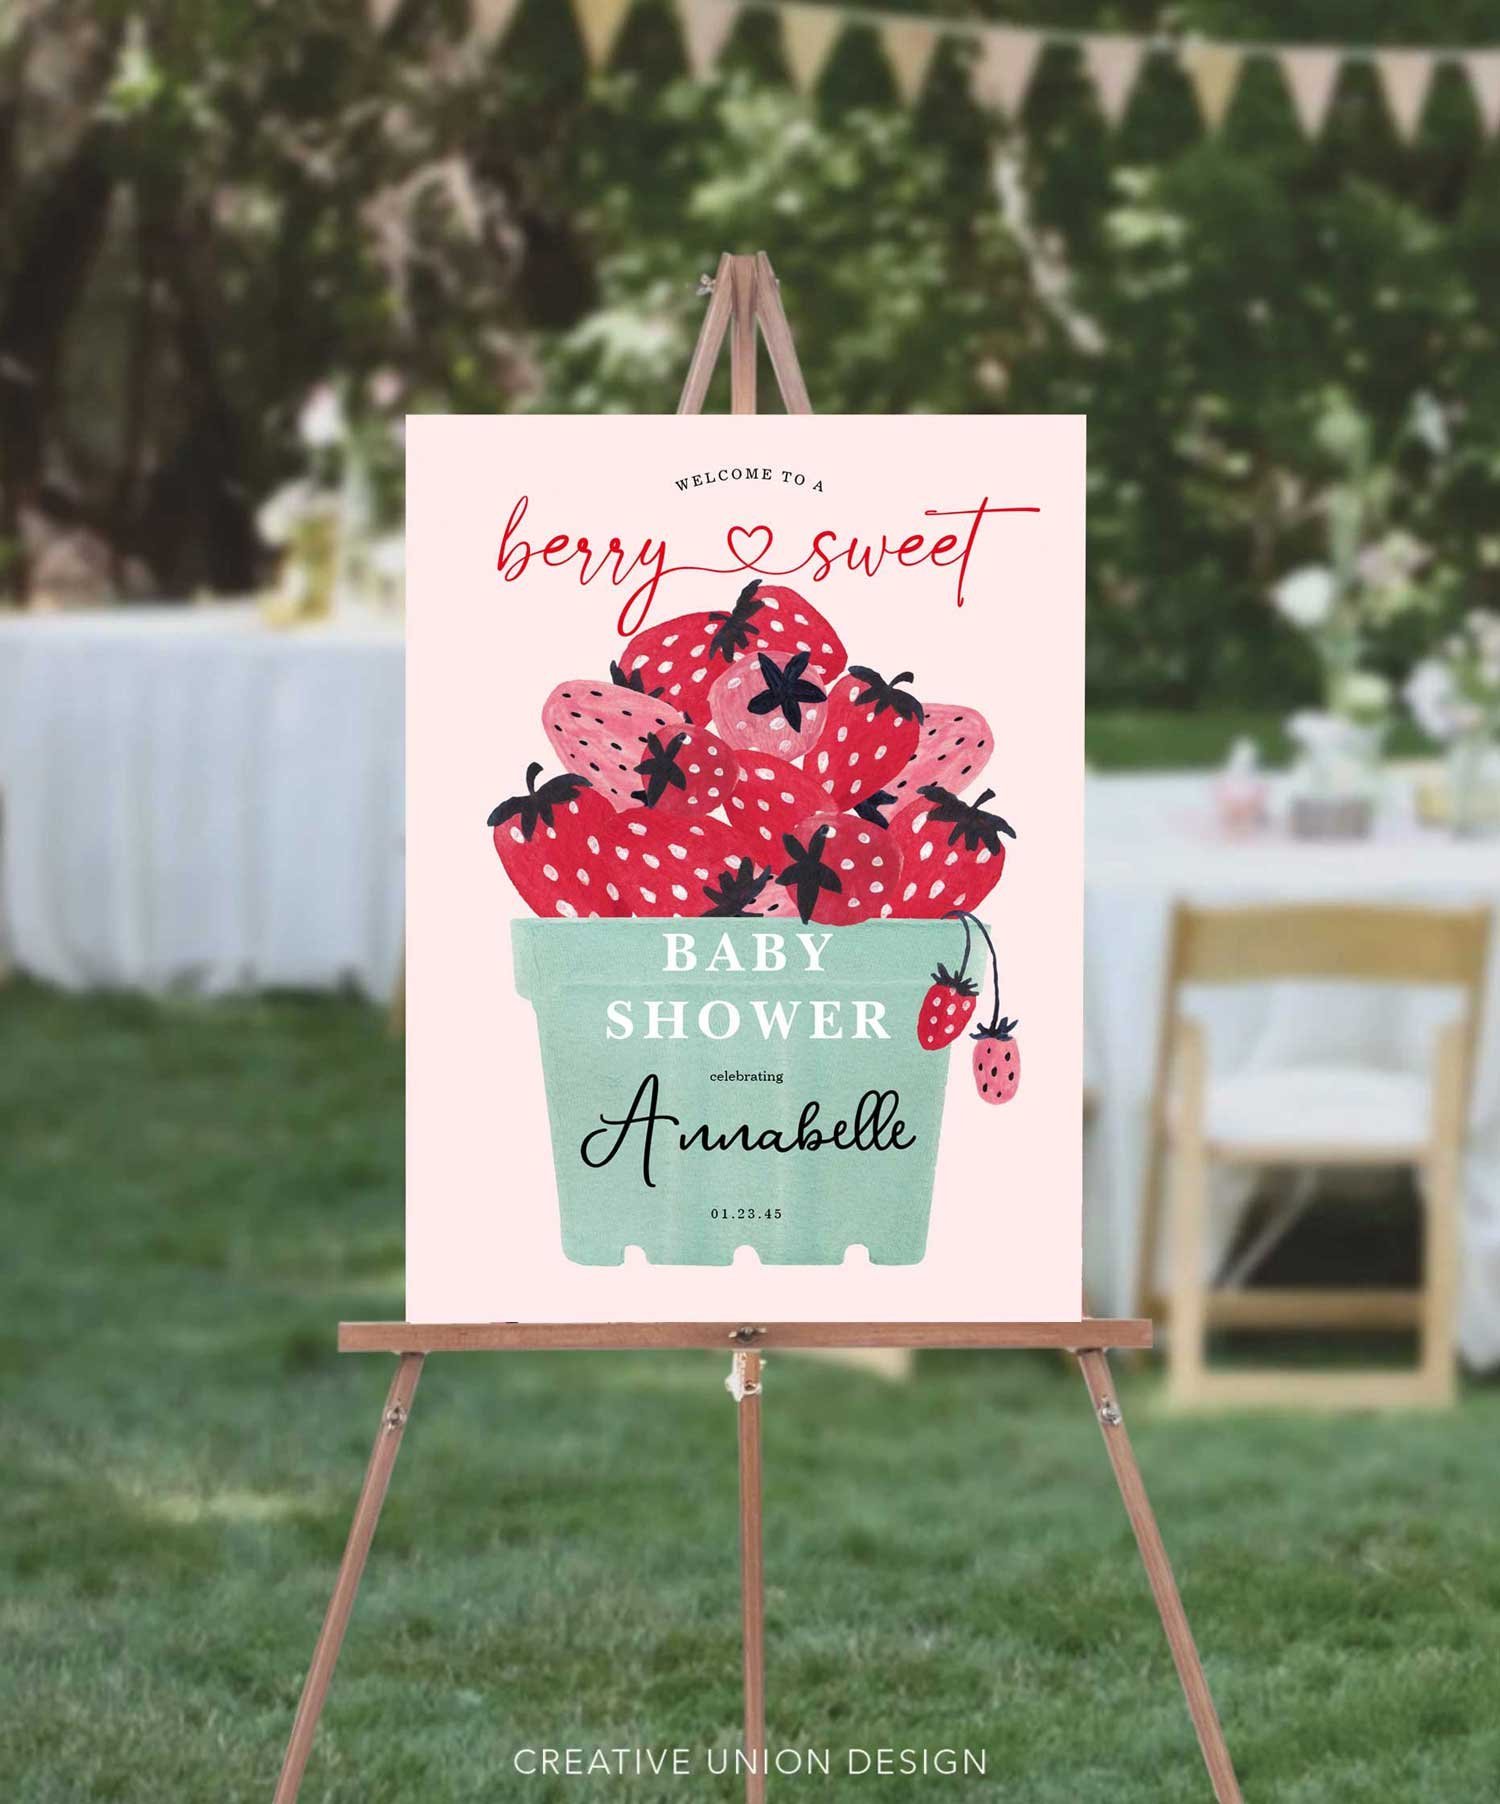 17 Berry Sweet Baby Shower Ideas You’ll Love